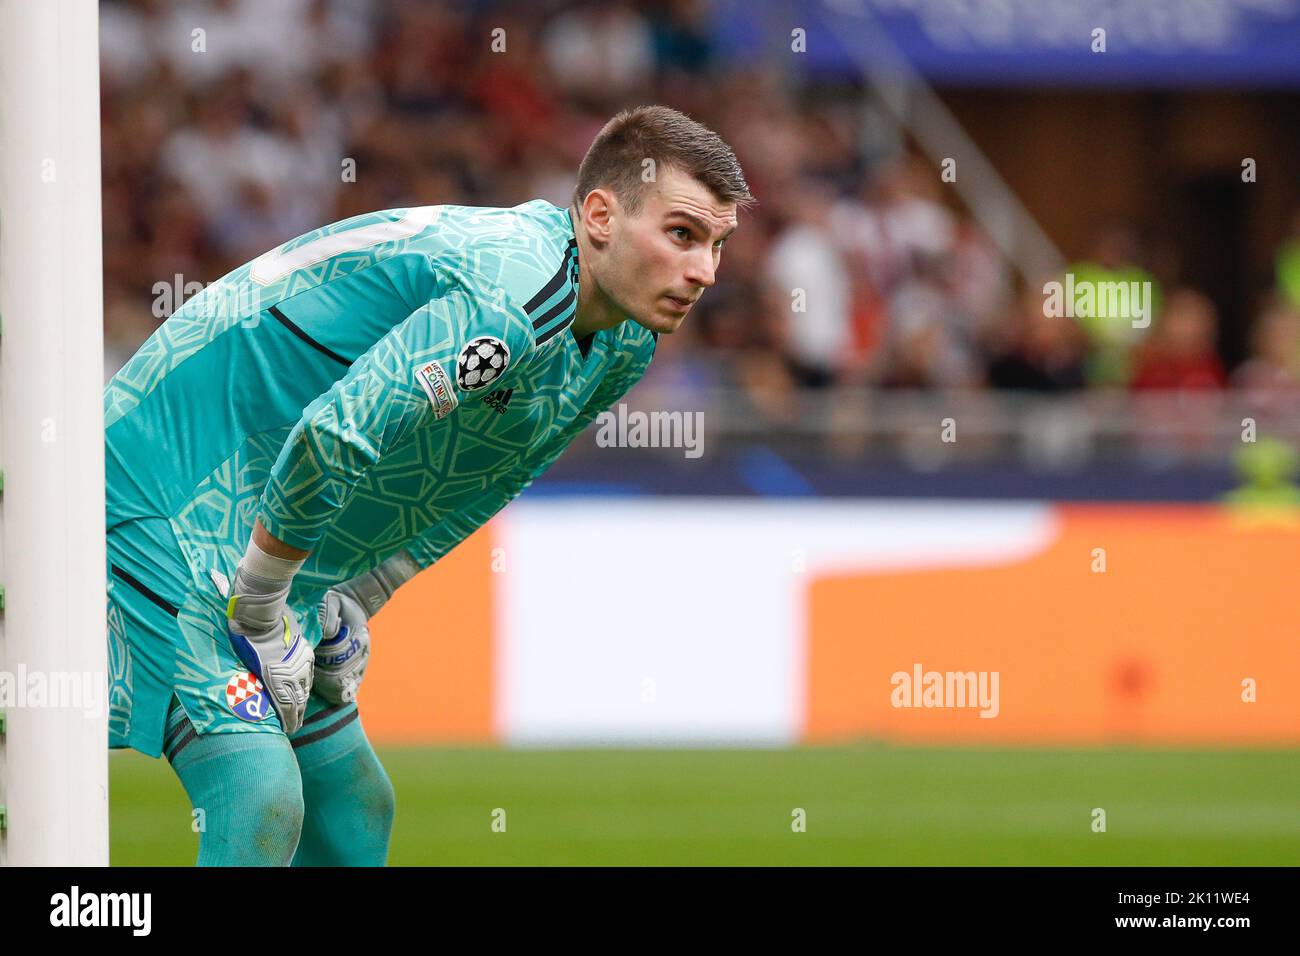 Milan, Italy. 14th Sep, 2022. Italy, Milan, sept 14 2022: Dominik Livakovic (Dinamo Zagreb goalkeeper) in the goal area in the second half during soccer match AC MILAN vs DINAMO ZAGREB, UCL 2022-2023 matchday2 San Siro stadium (Photo by Fabrizio Andrea Bertani/Pacific Press) Credit: Pacific Press Media Production Corp./Alamy Live News Stock Photo